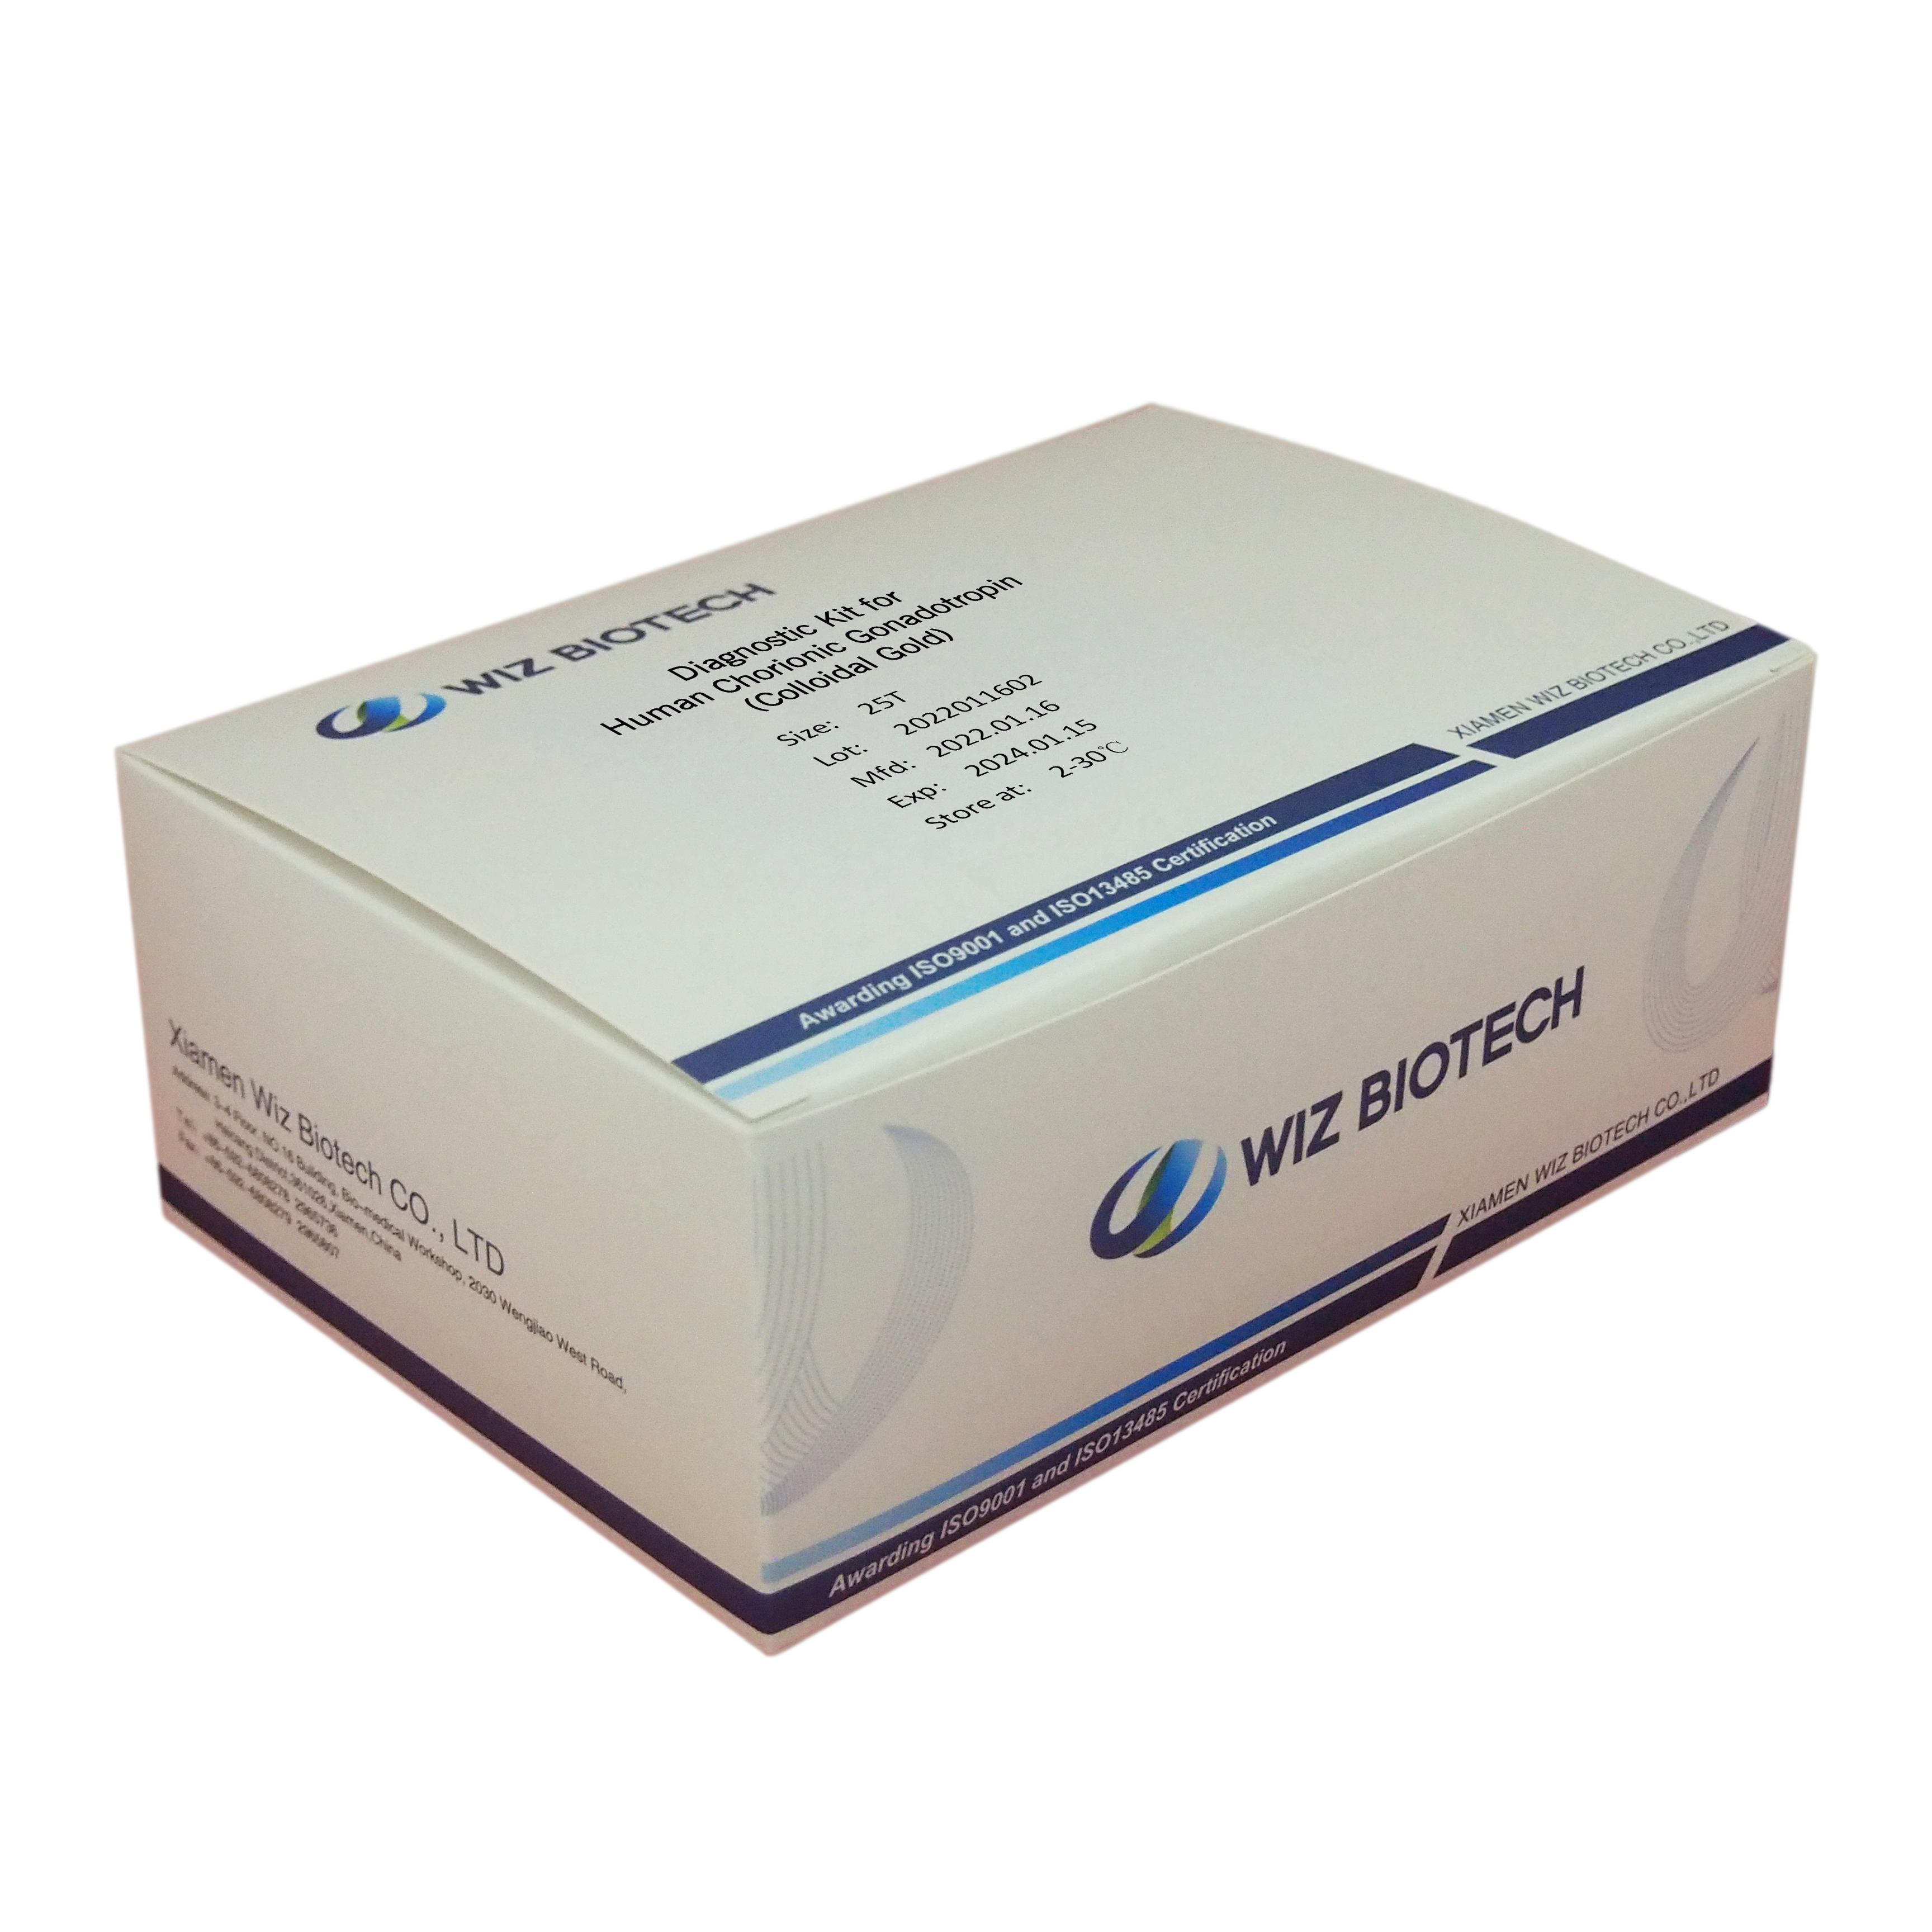 Diagnostic kit for Human Chorionic Gonadotropin pregnanacy test Colloidal Gold Featured Image